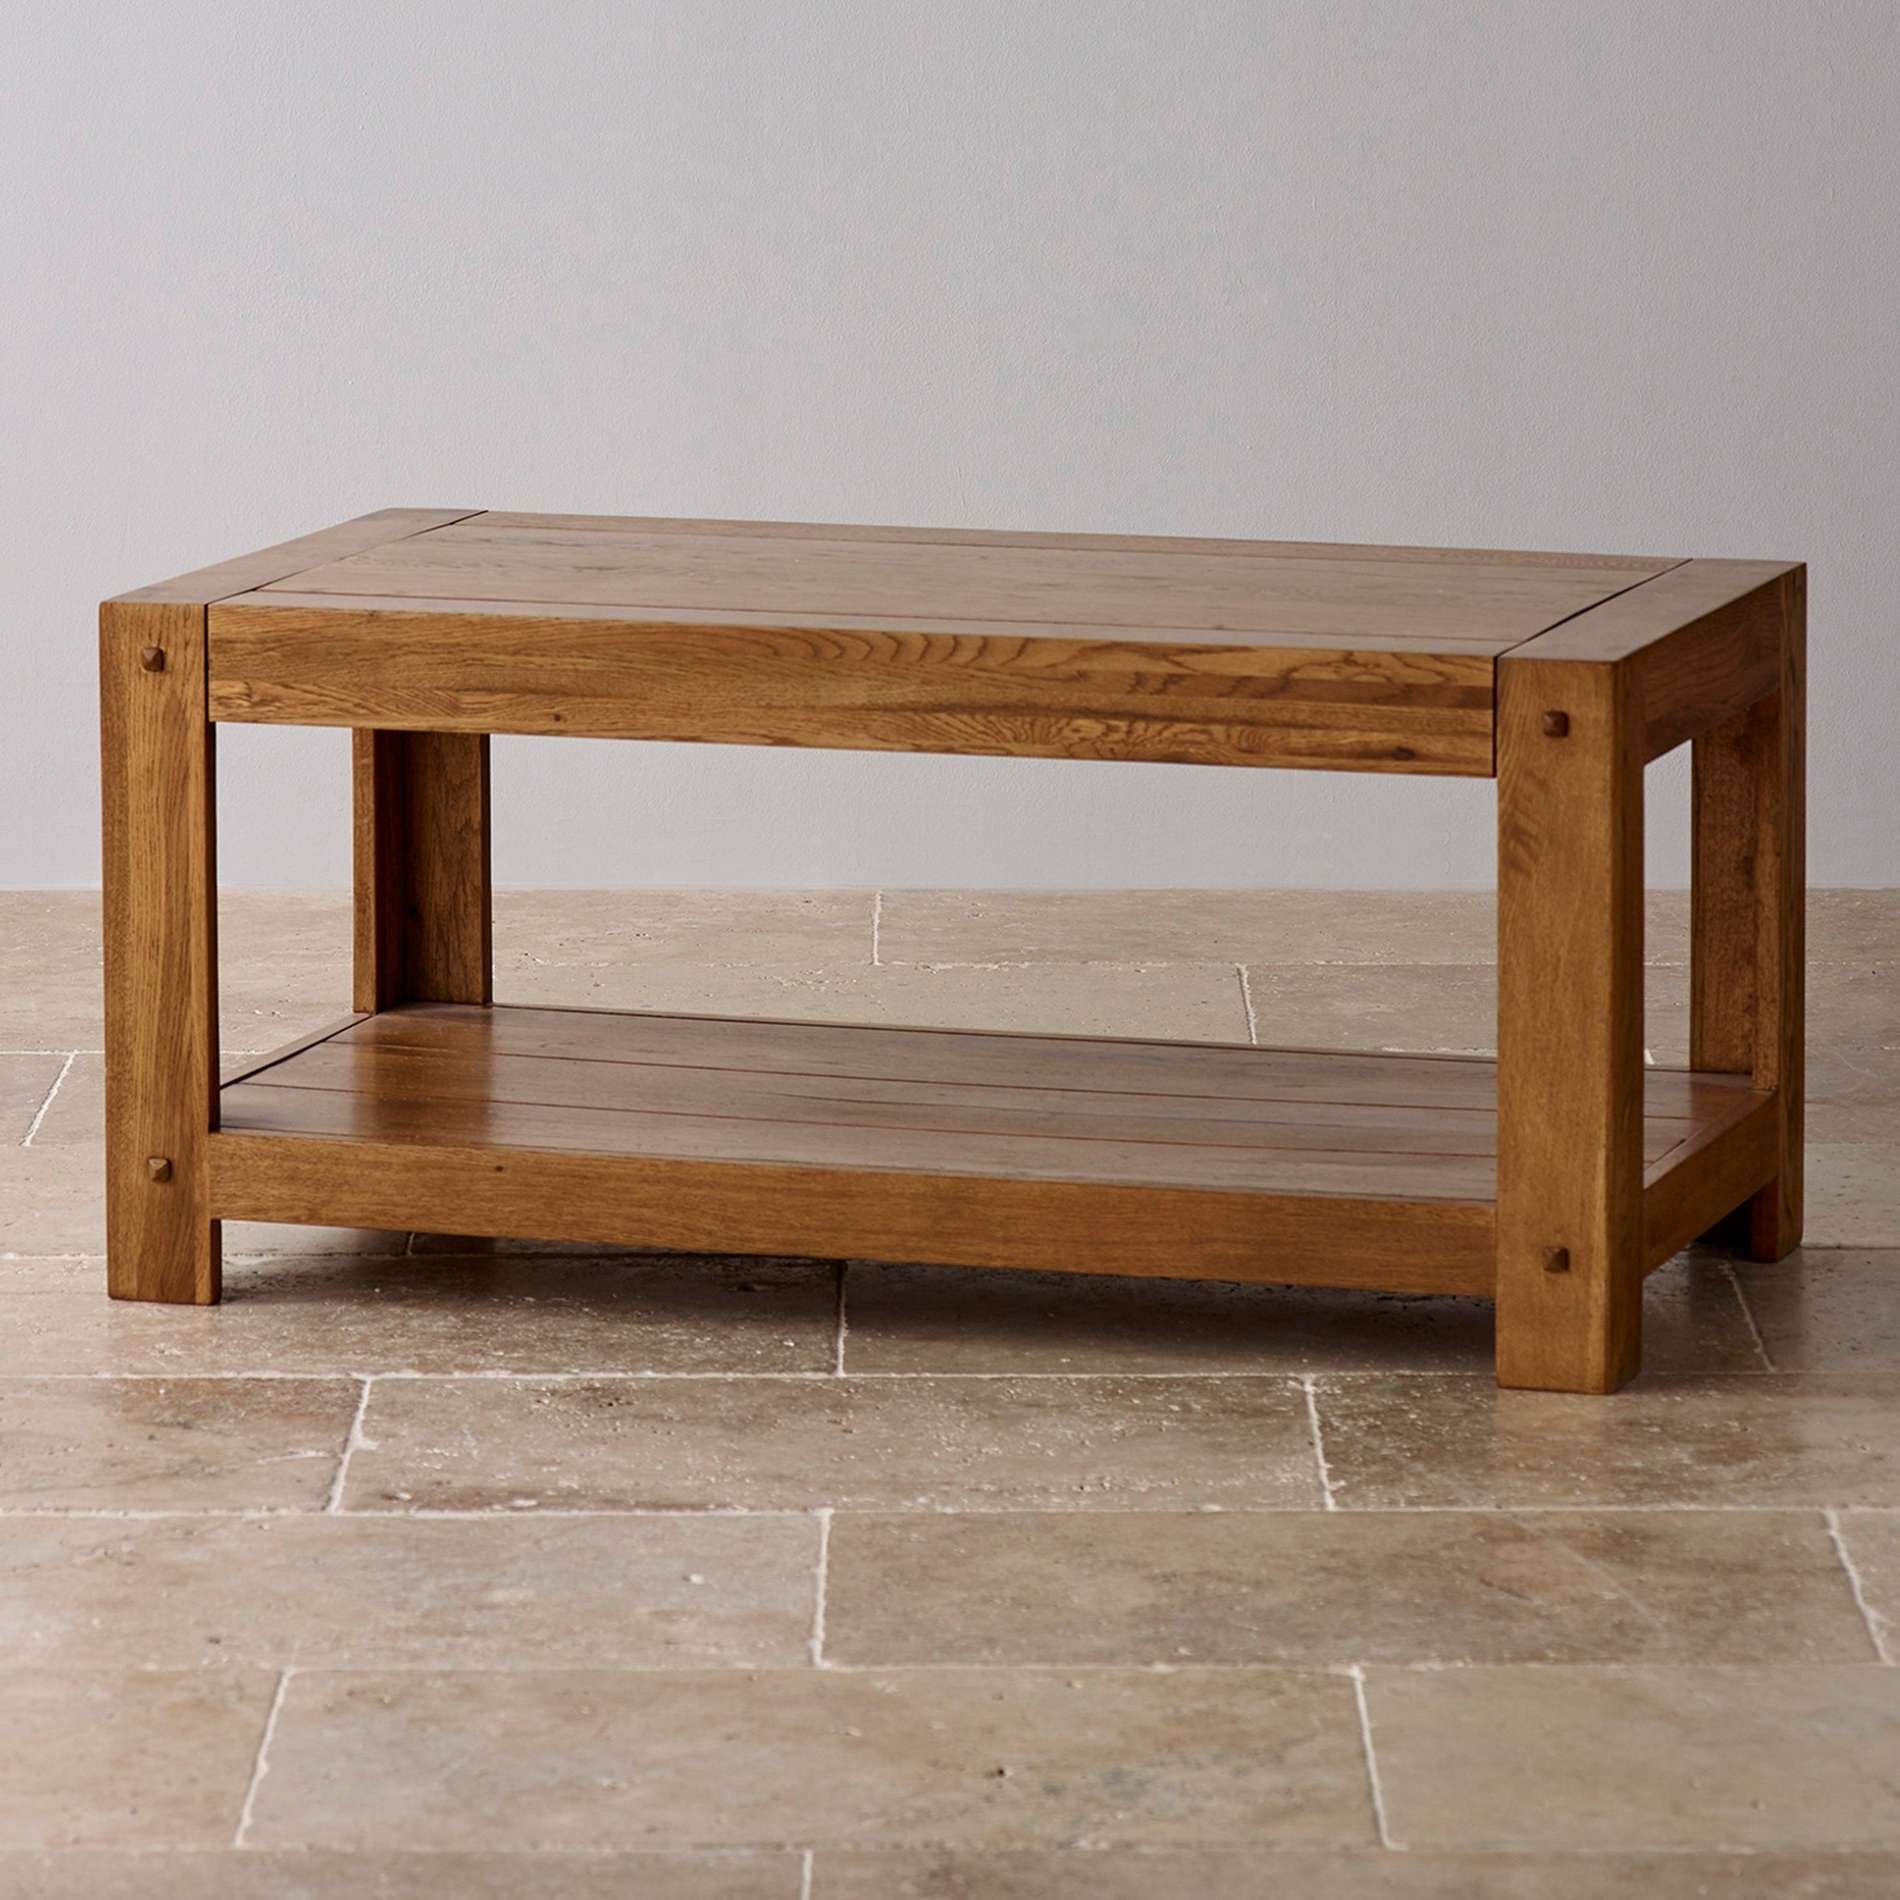 Most Recent Oak Wood Coffee Tables Inside Small Oak Coffee Tables Uk Best Of Tokyo Natural Solid Oak Large (Gallery 12 of 20)